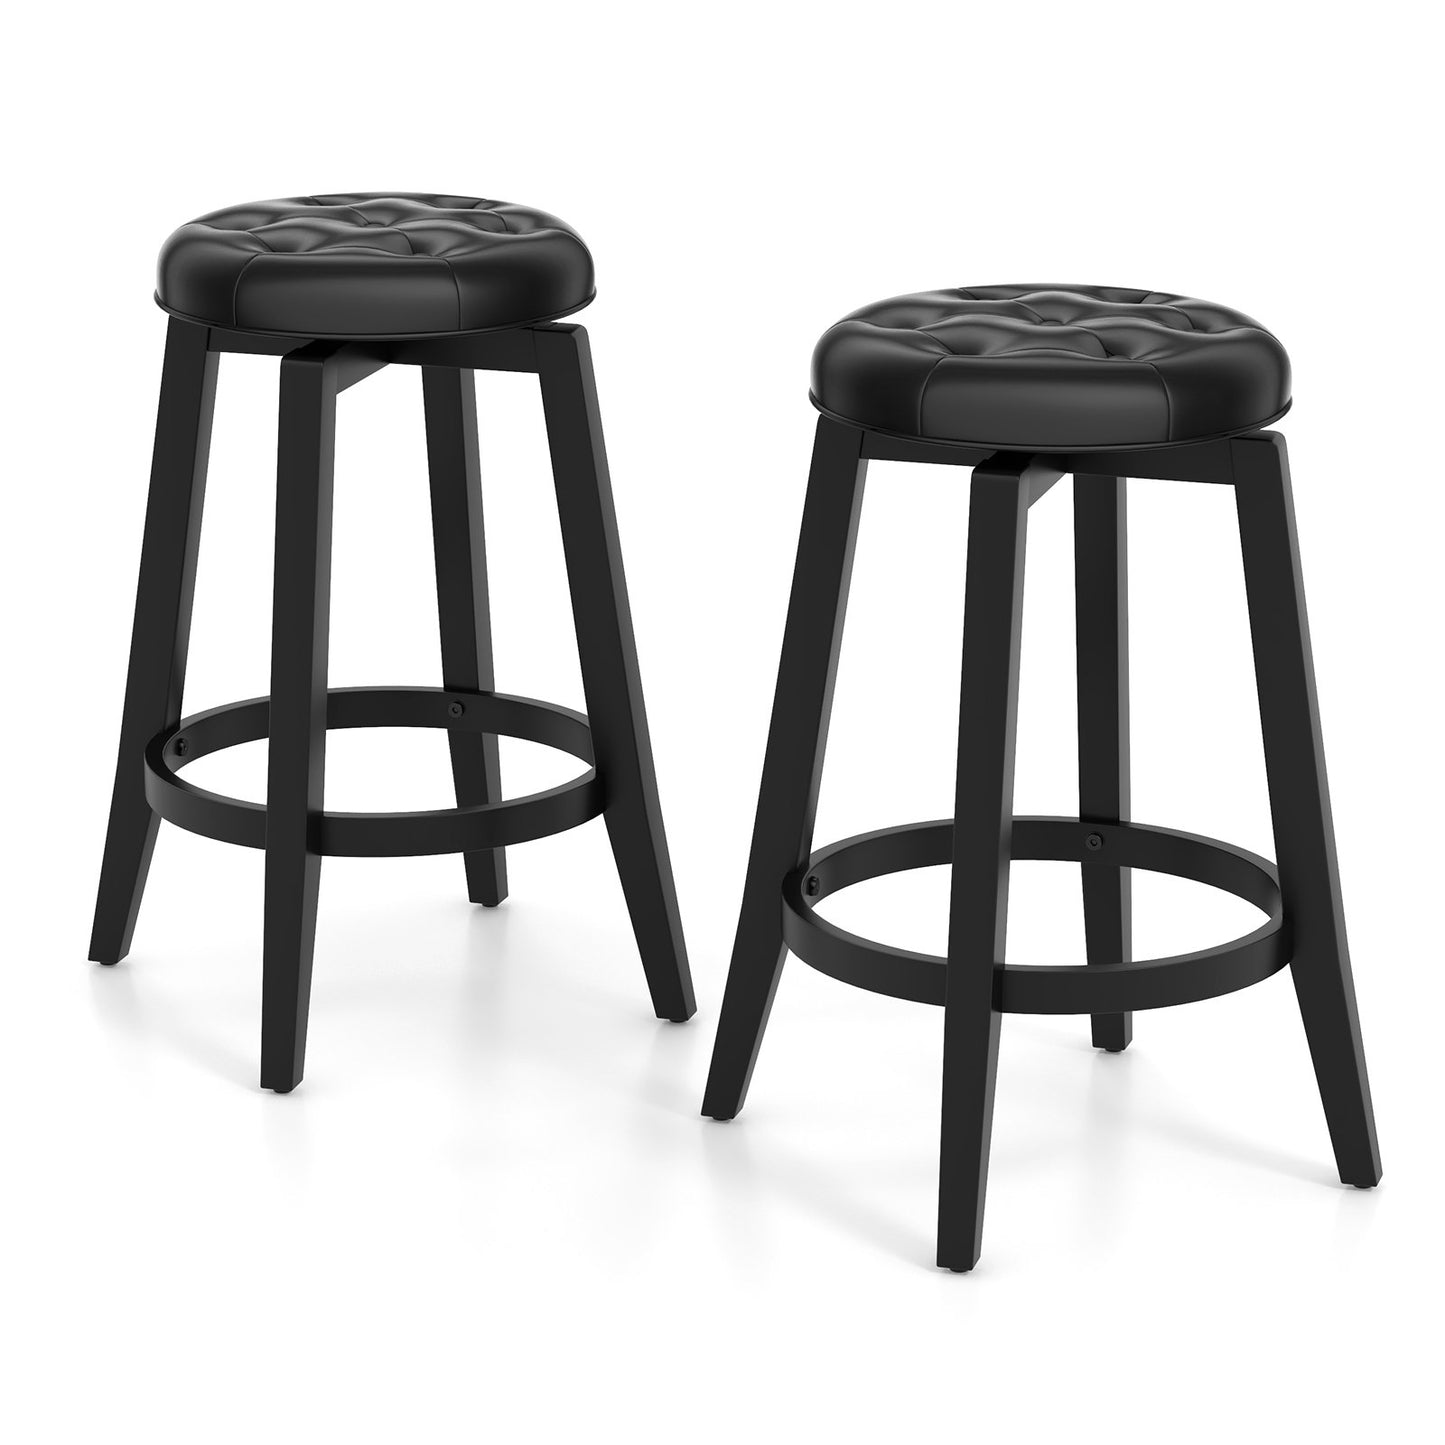 360° Swivel Upholstered Rubberwood Frame Bar Stool Set of 2 with Footrest-24 inches, Black